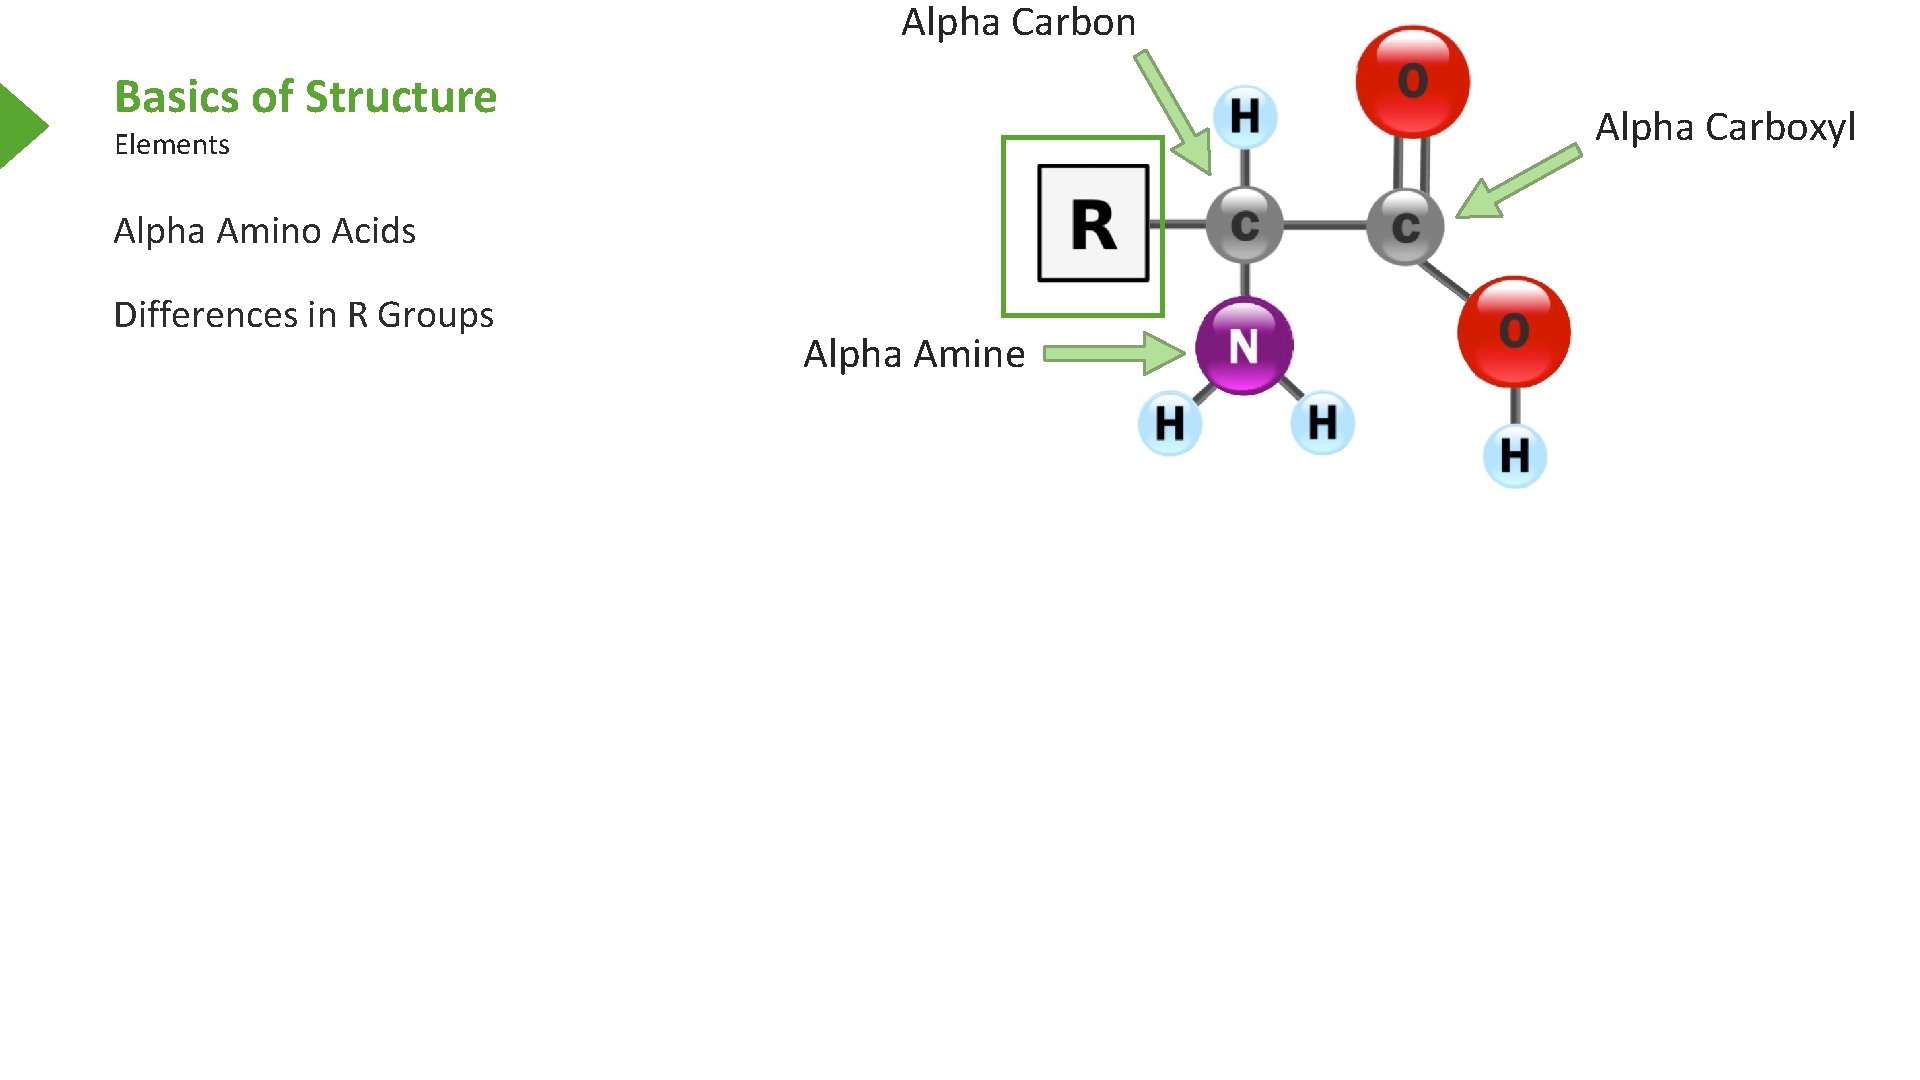 Alpha Carbon Basics of Structure Alpha Carboxyl Elements Alpha Amino Acids Differences in R